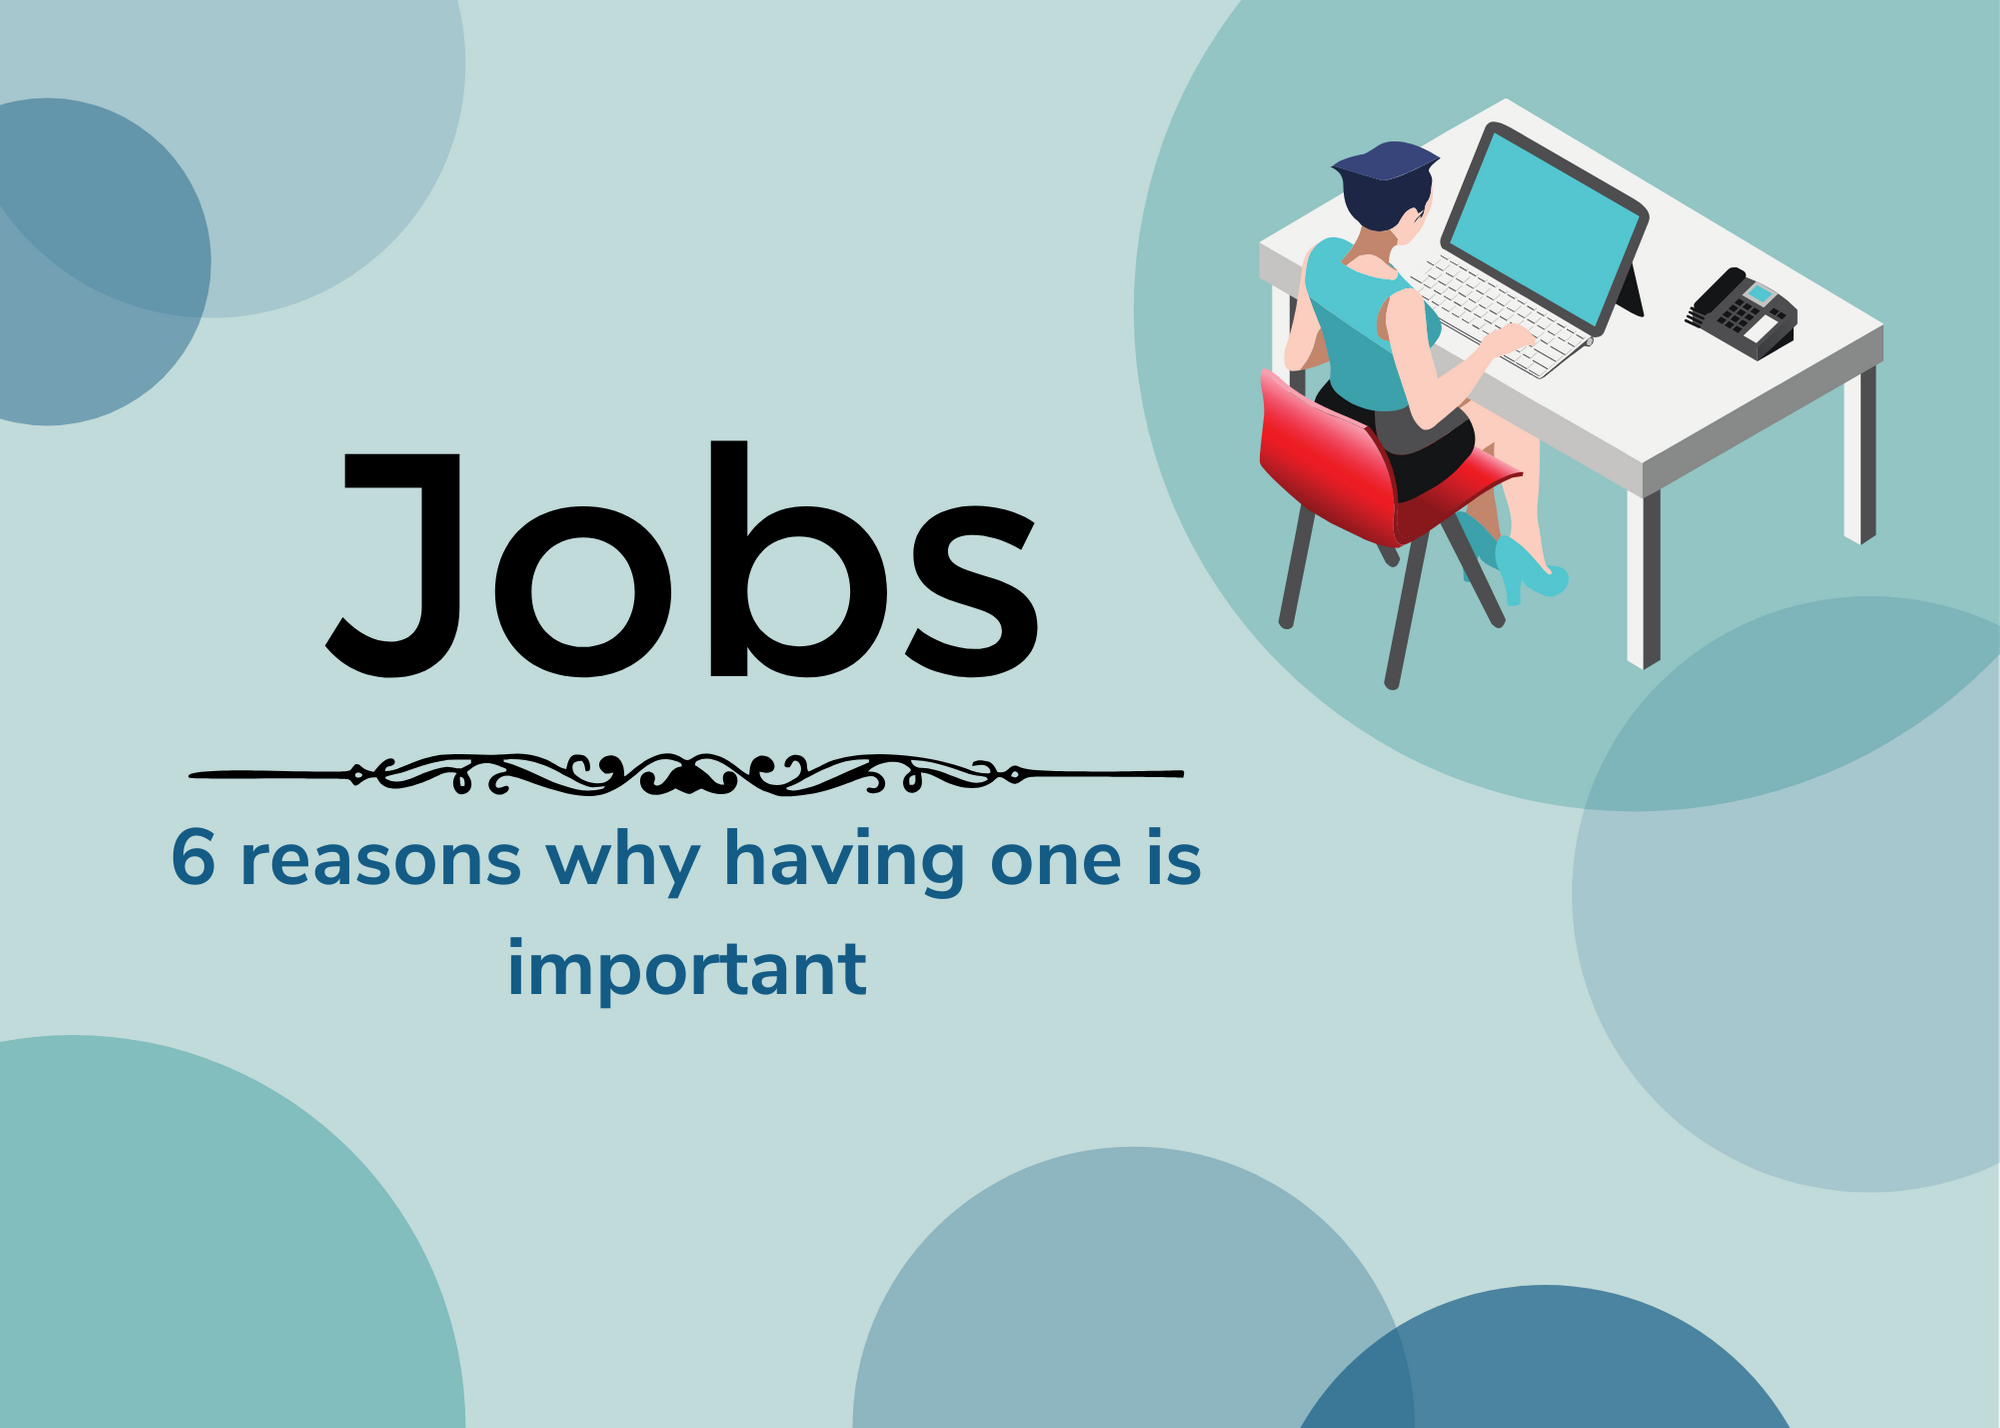 Jobs: 6 reasons why having one is important